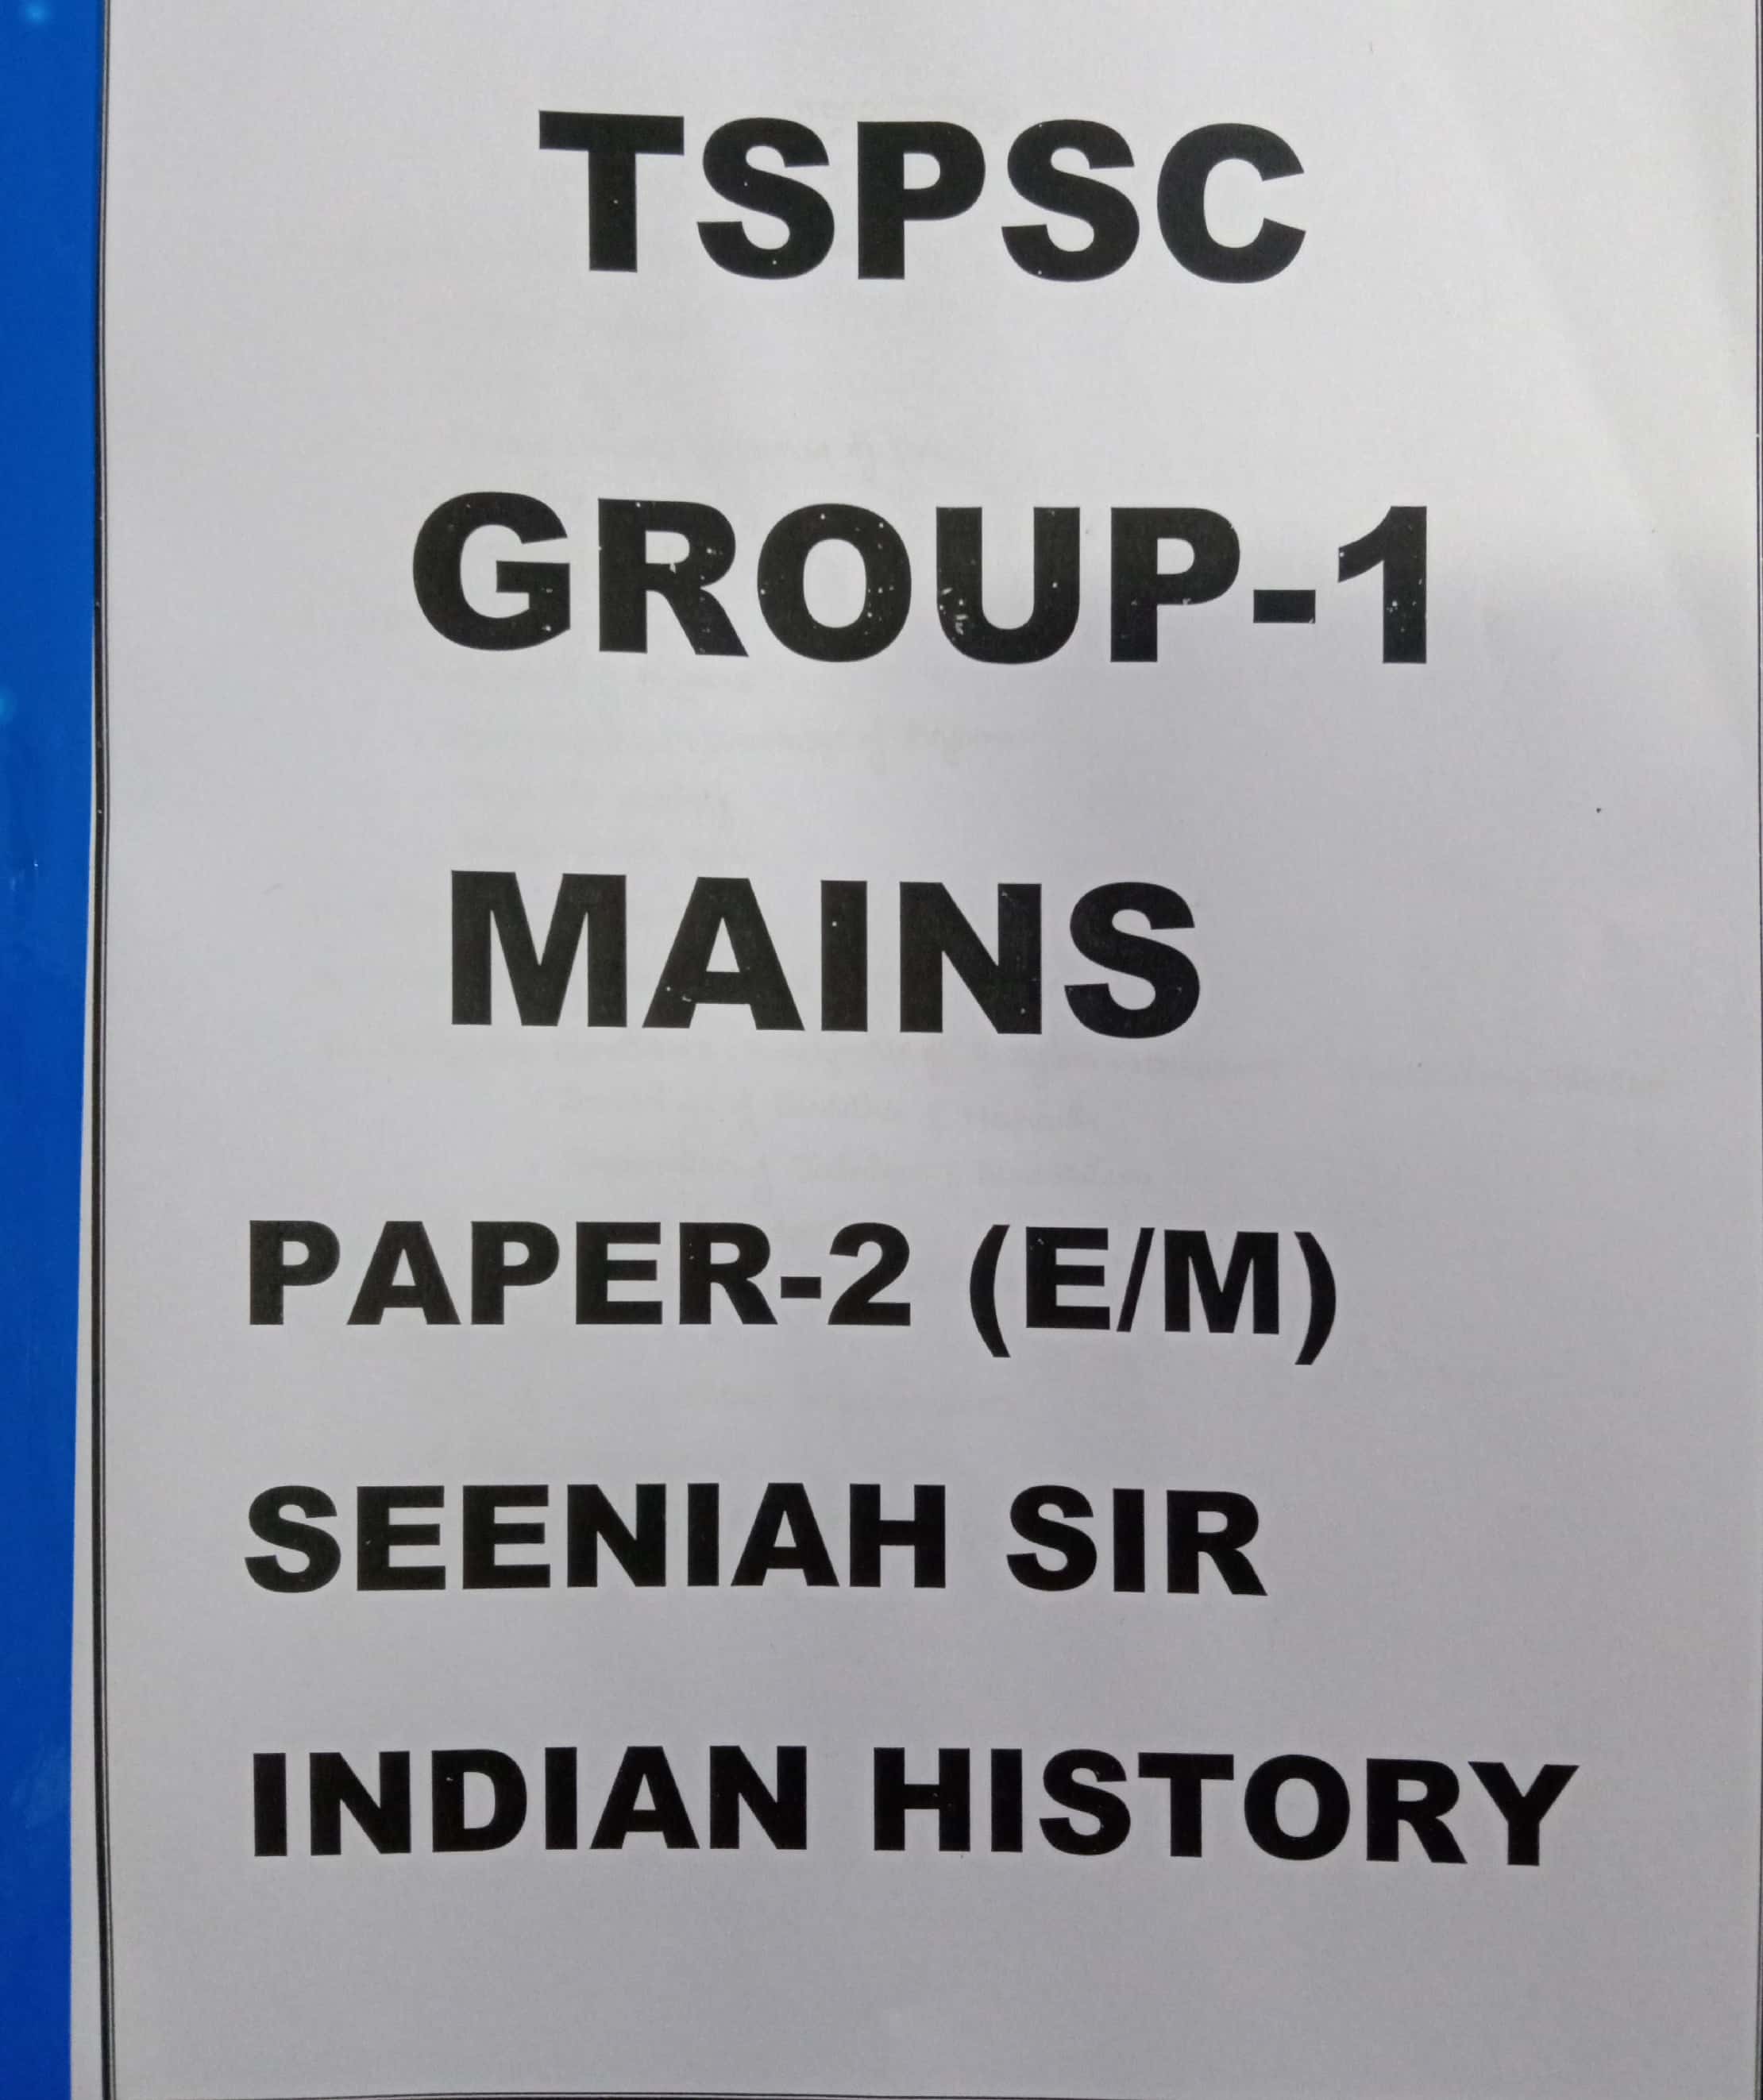 TSPSC GROUP 1 MAINS PAPER 2 INDIAN HISTORY CLASSNOTES XEROX [ENGLISH MEDIUM]